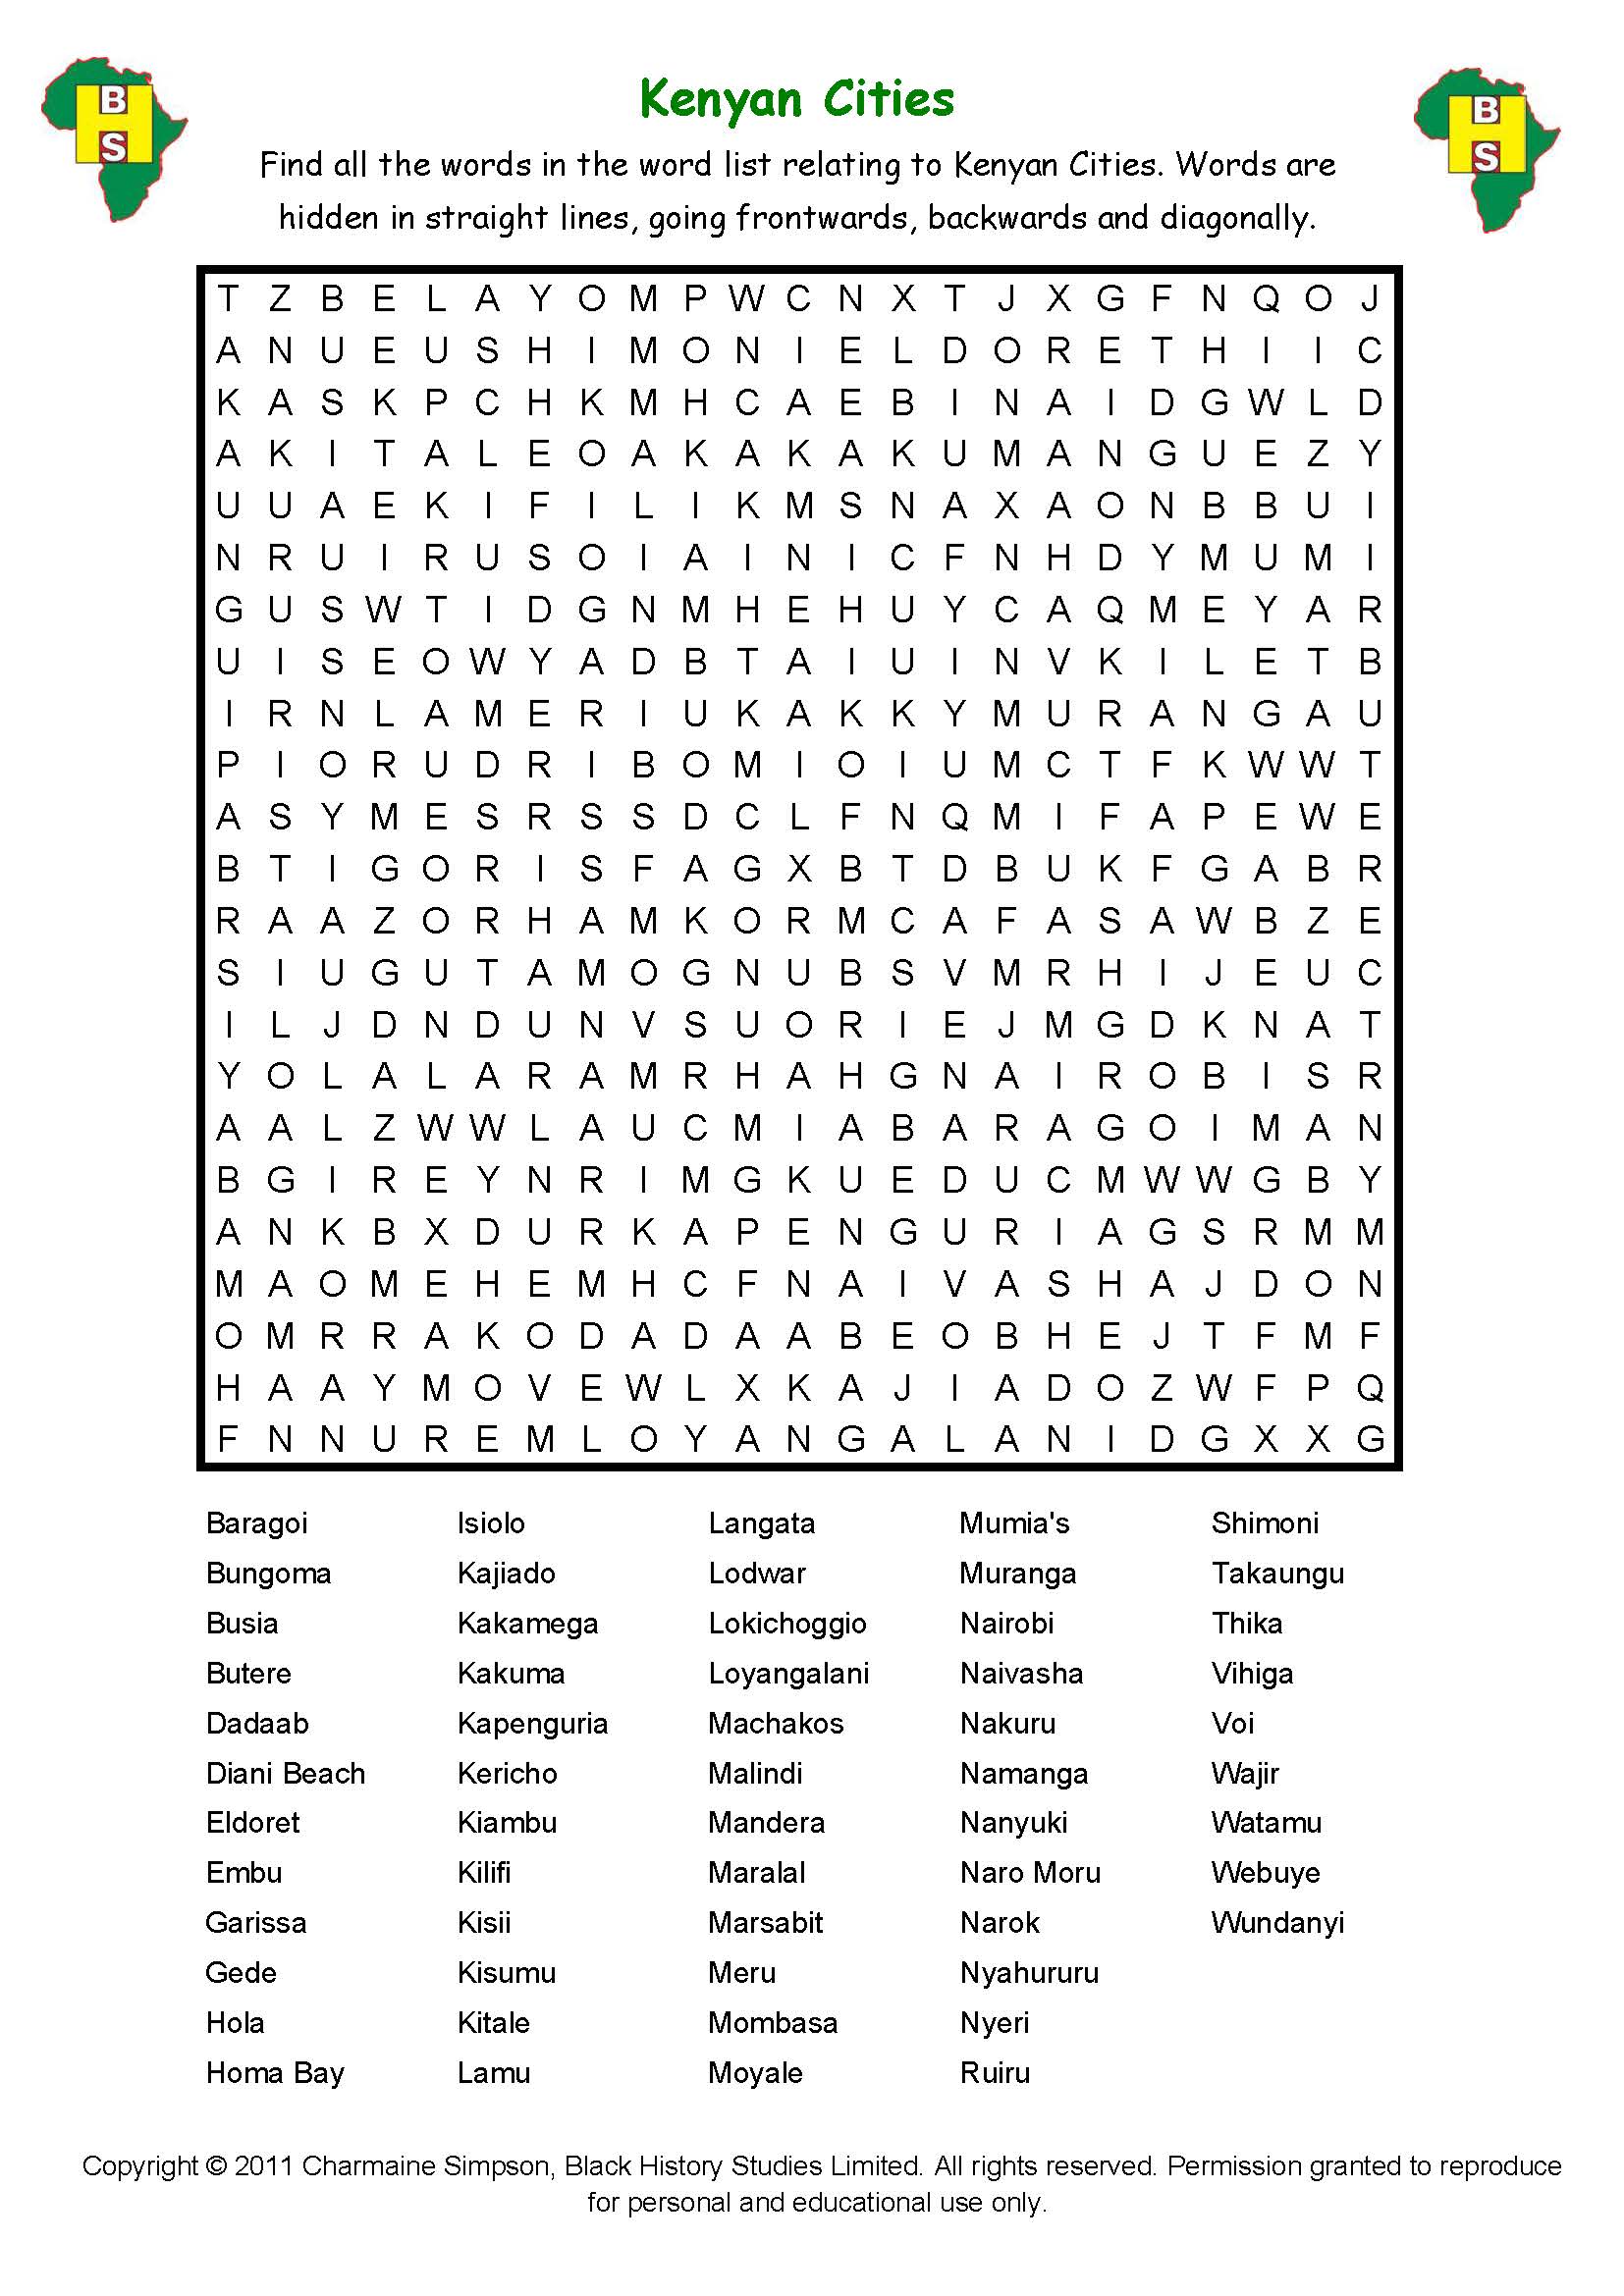 4 Best Images of Black History Word Search Puzzle Printable Black